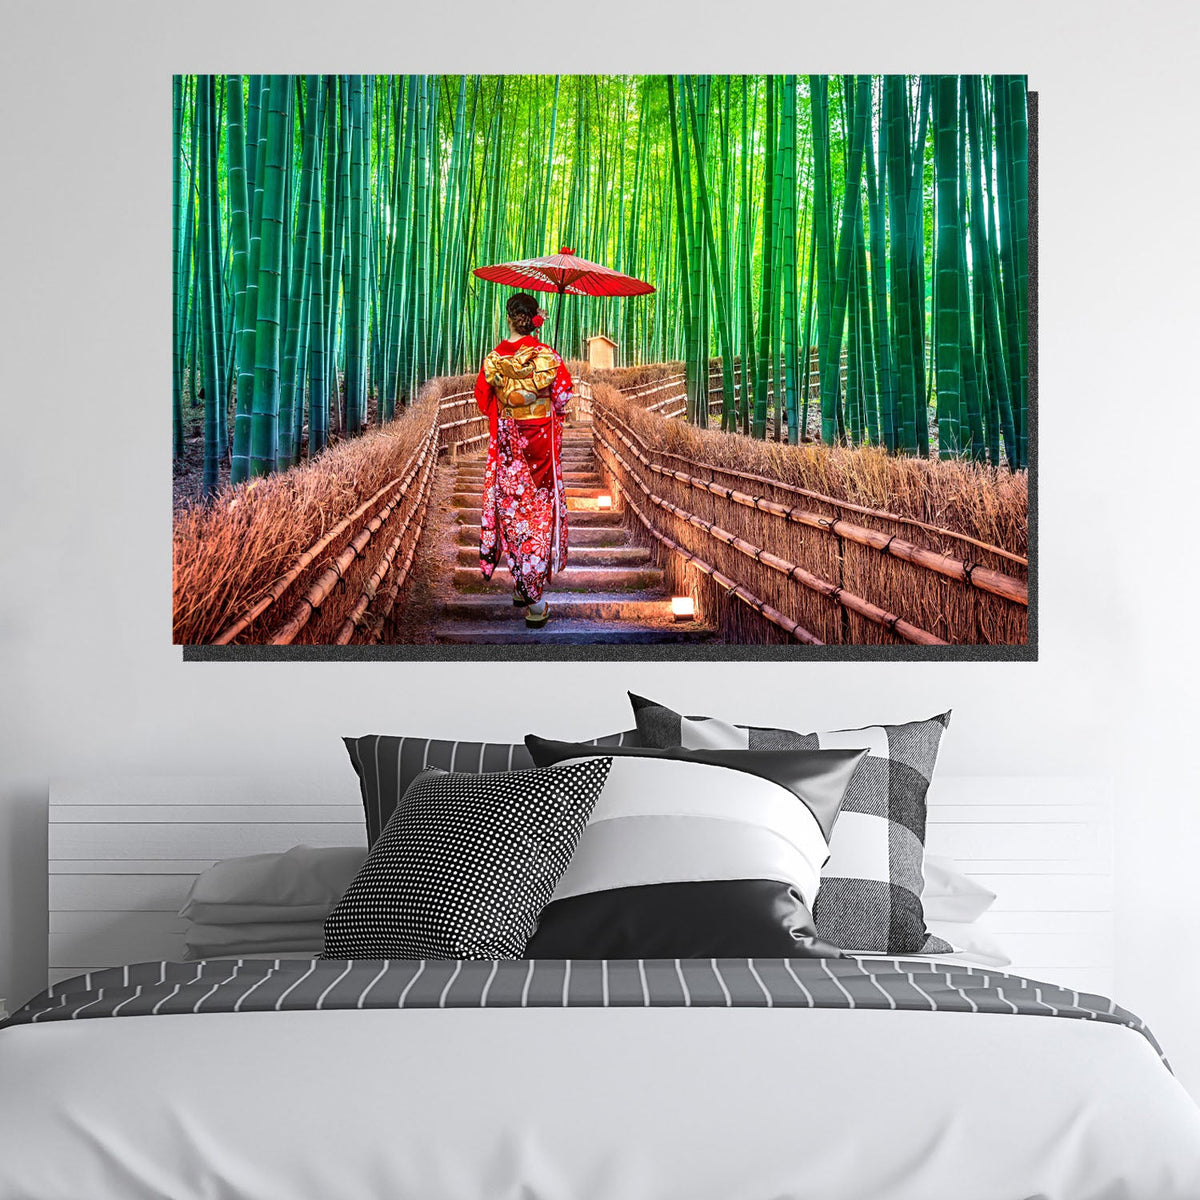 https://cdn.shopify.com/s/files/1/0387/9986/8044/products/KyotoBambooForestCanvasArtprintStretched-3.jpg